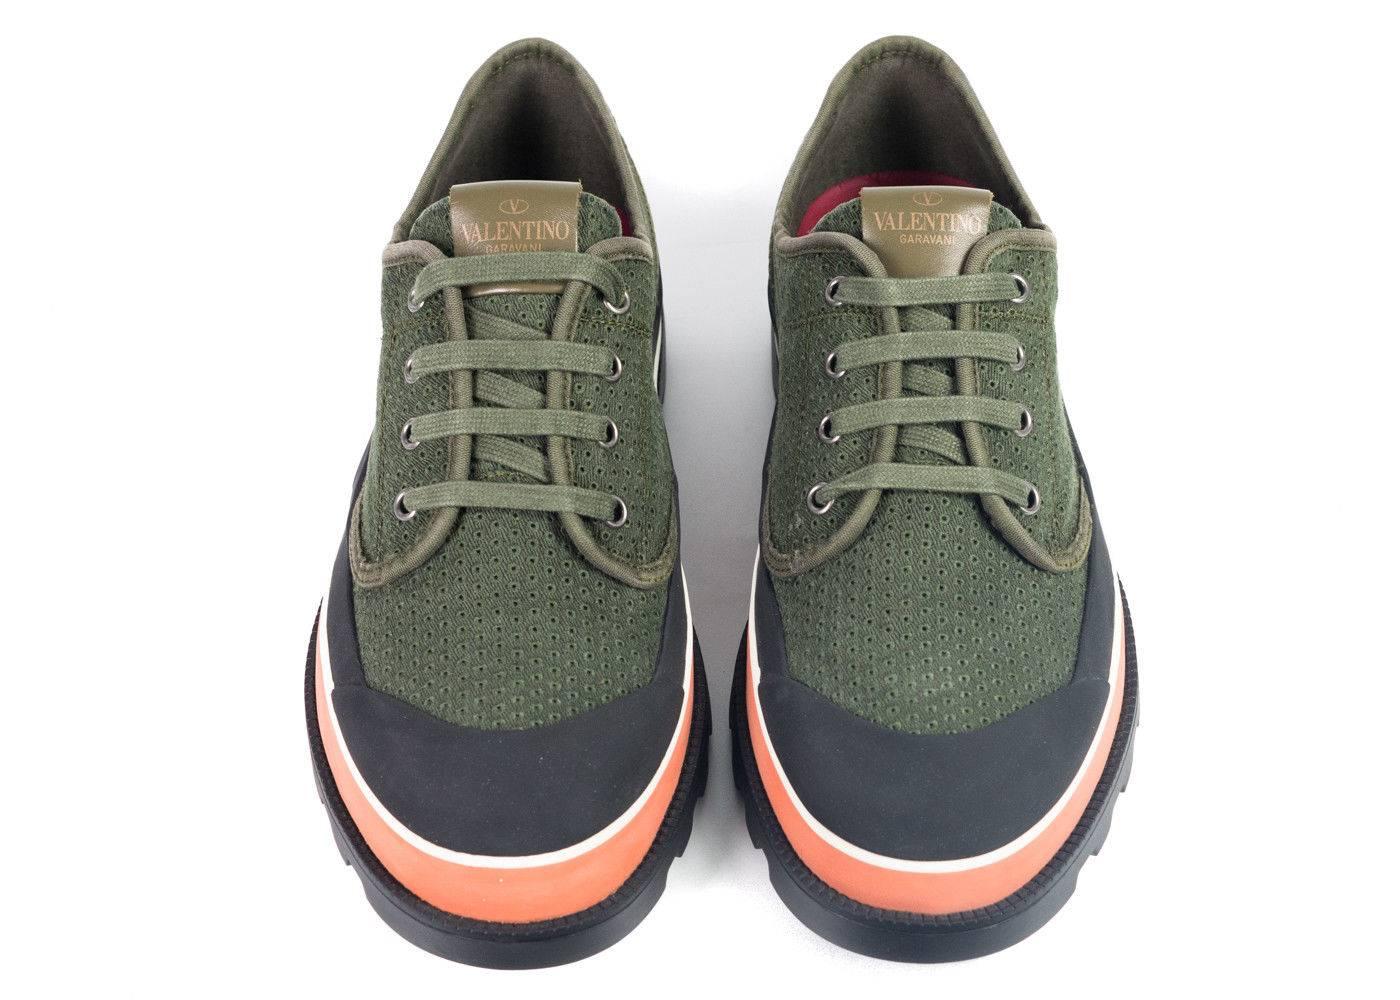 Brand New Valentino Perforated Low Top Sneakers
Original Tags
Retails in Stores & Online for $795
Men's Size EUR 42.5/ US 9.5 Fits True to Size

The perforated id sneakers are perfect for that casual outing. The tri-color rubber trim protects